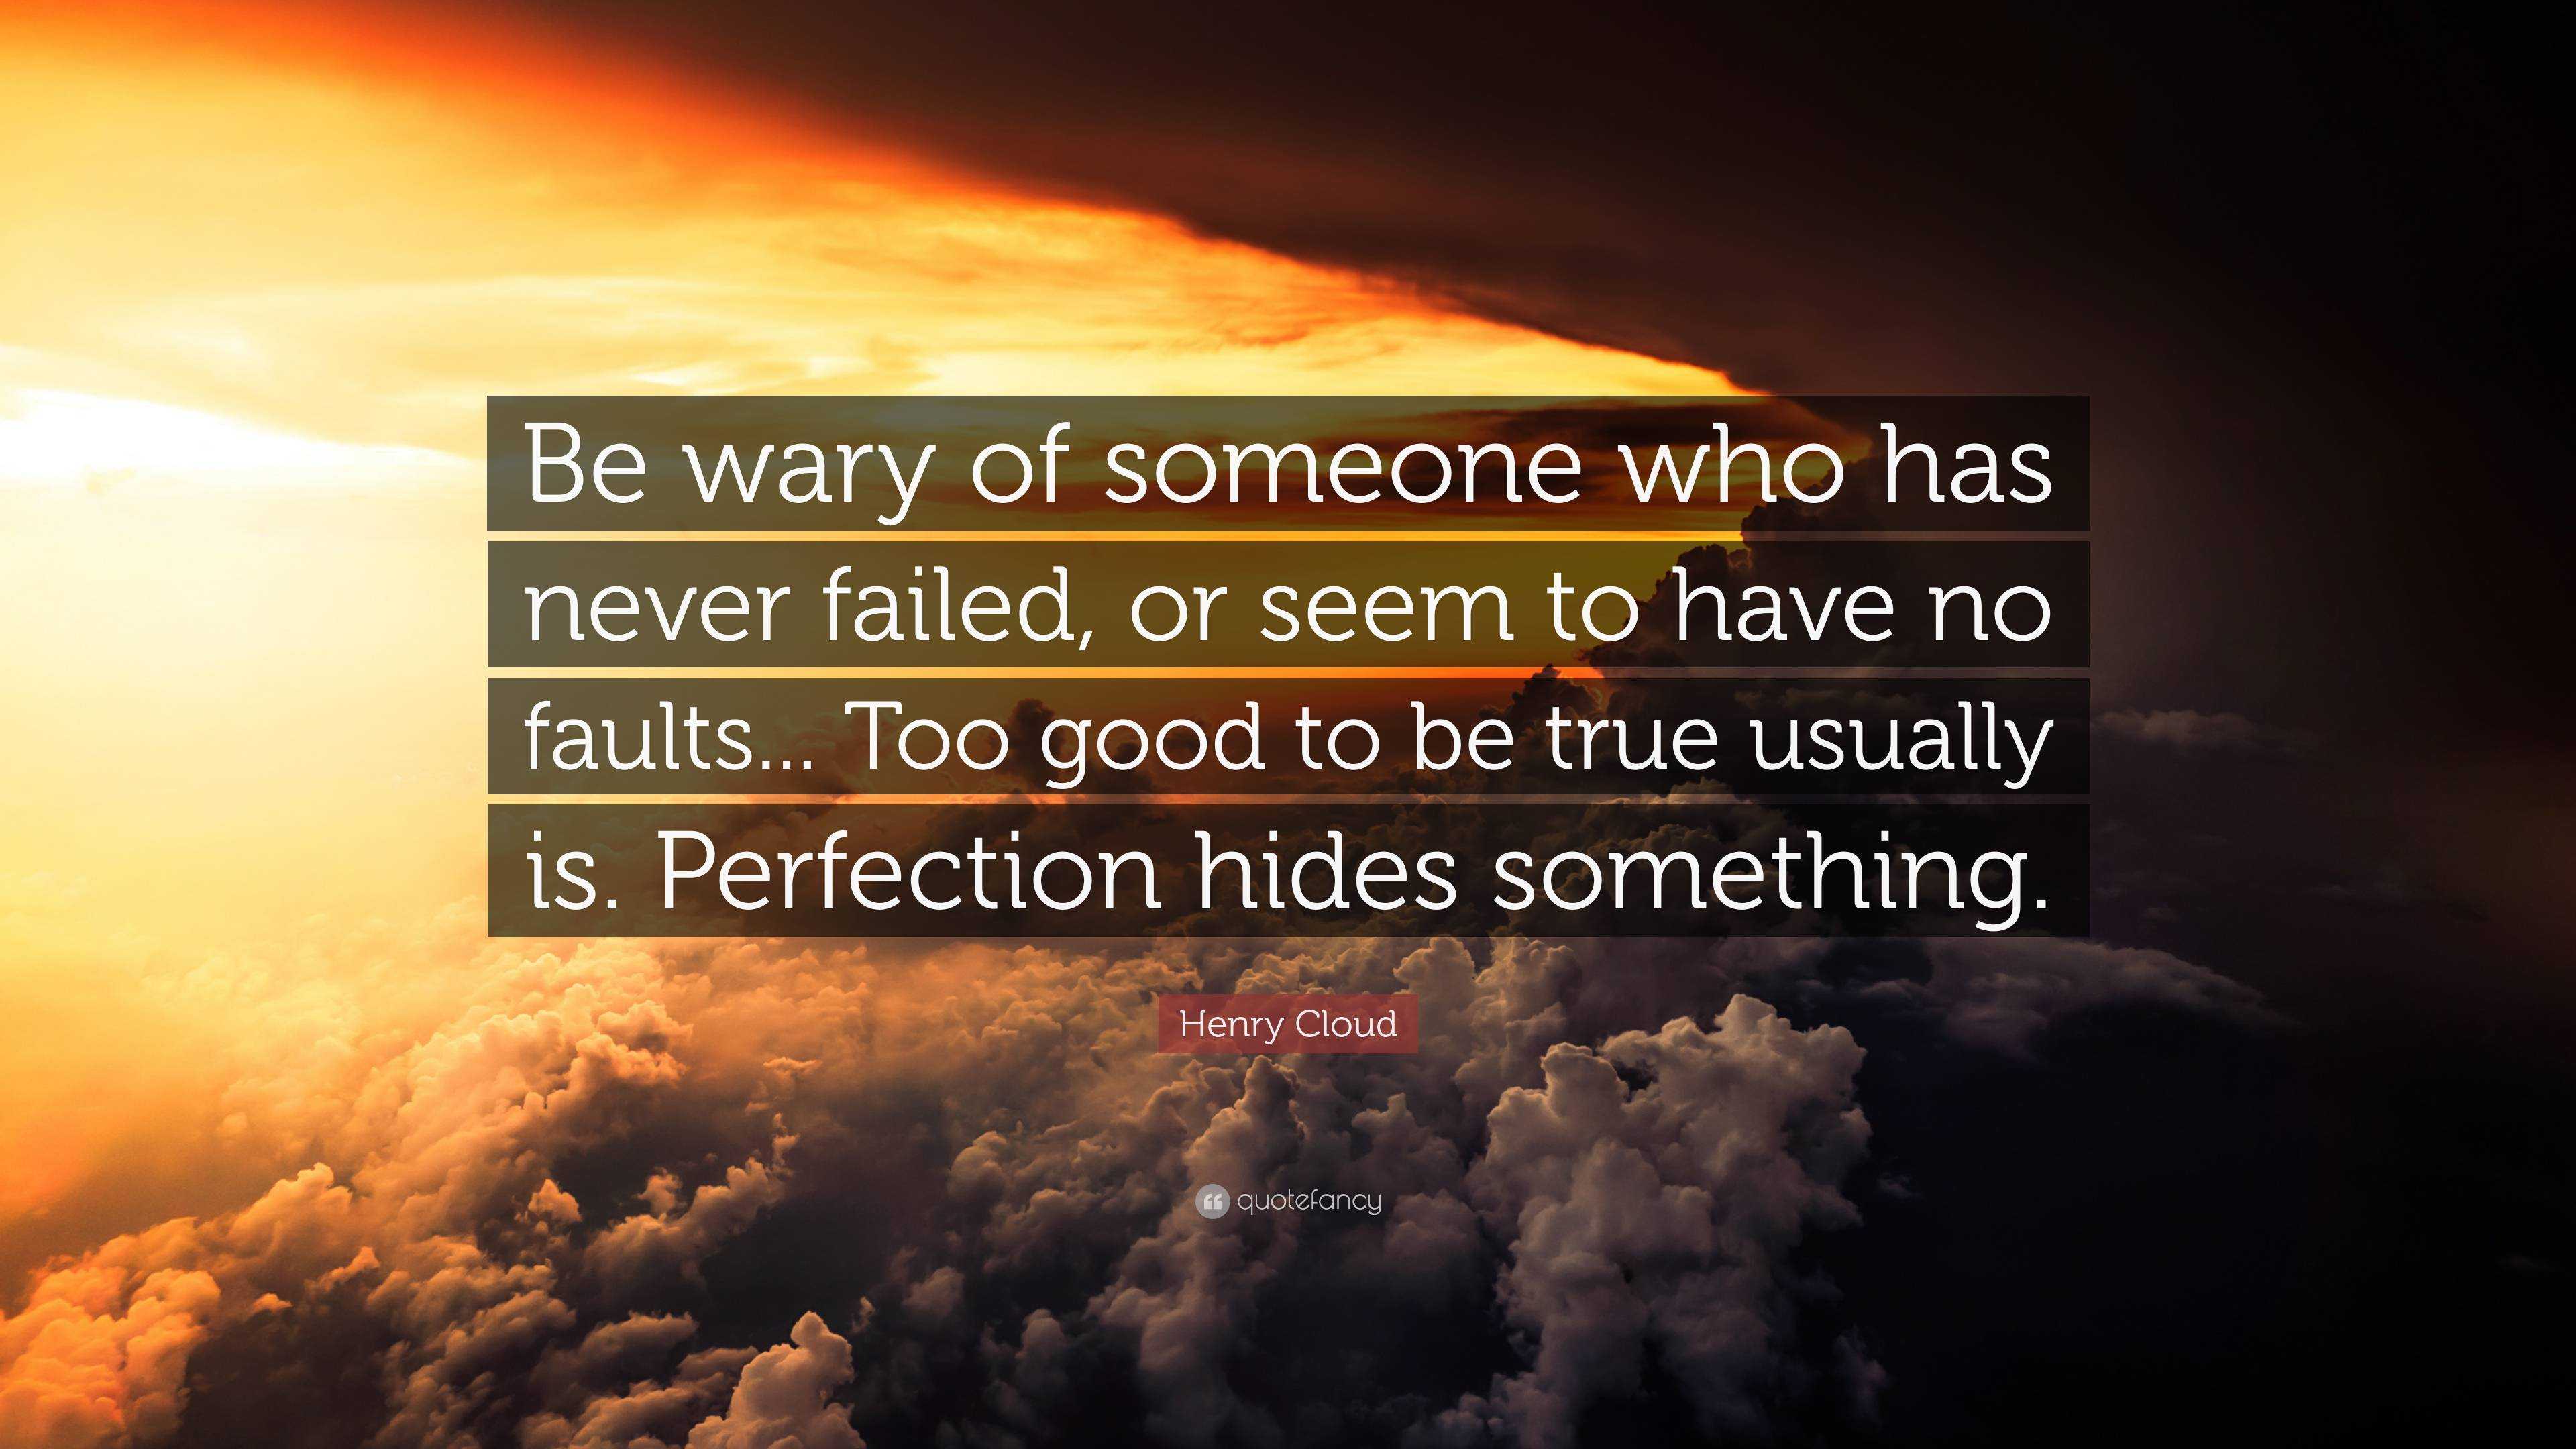 Henry Cloud Quote Be Wary Of Someone Who Has Never Failed Or Seem To Have No Faults Too Good To Be True Usually Is Perfection Hides S